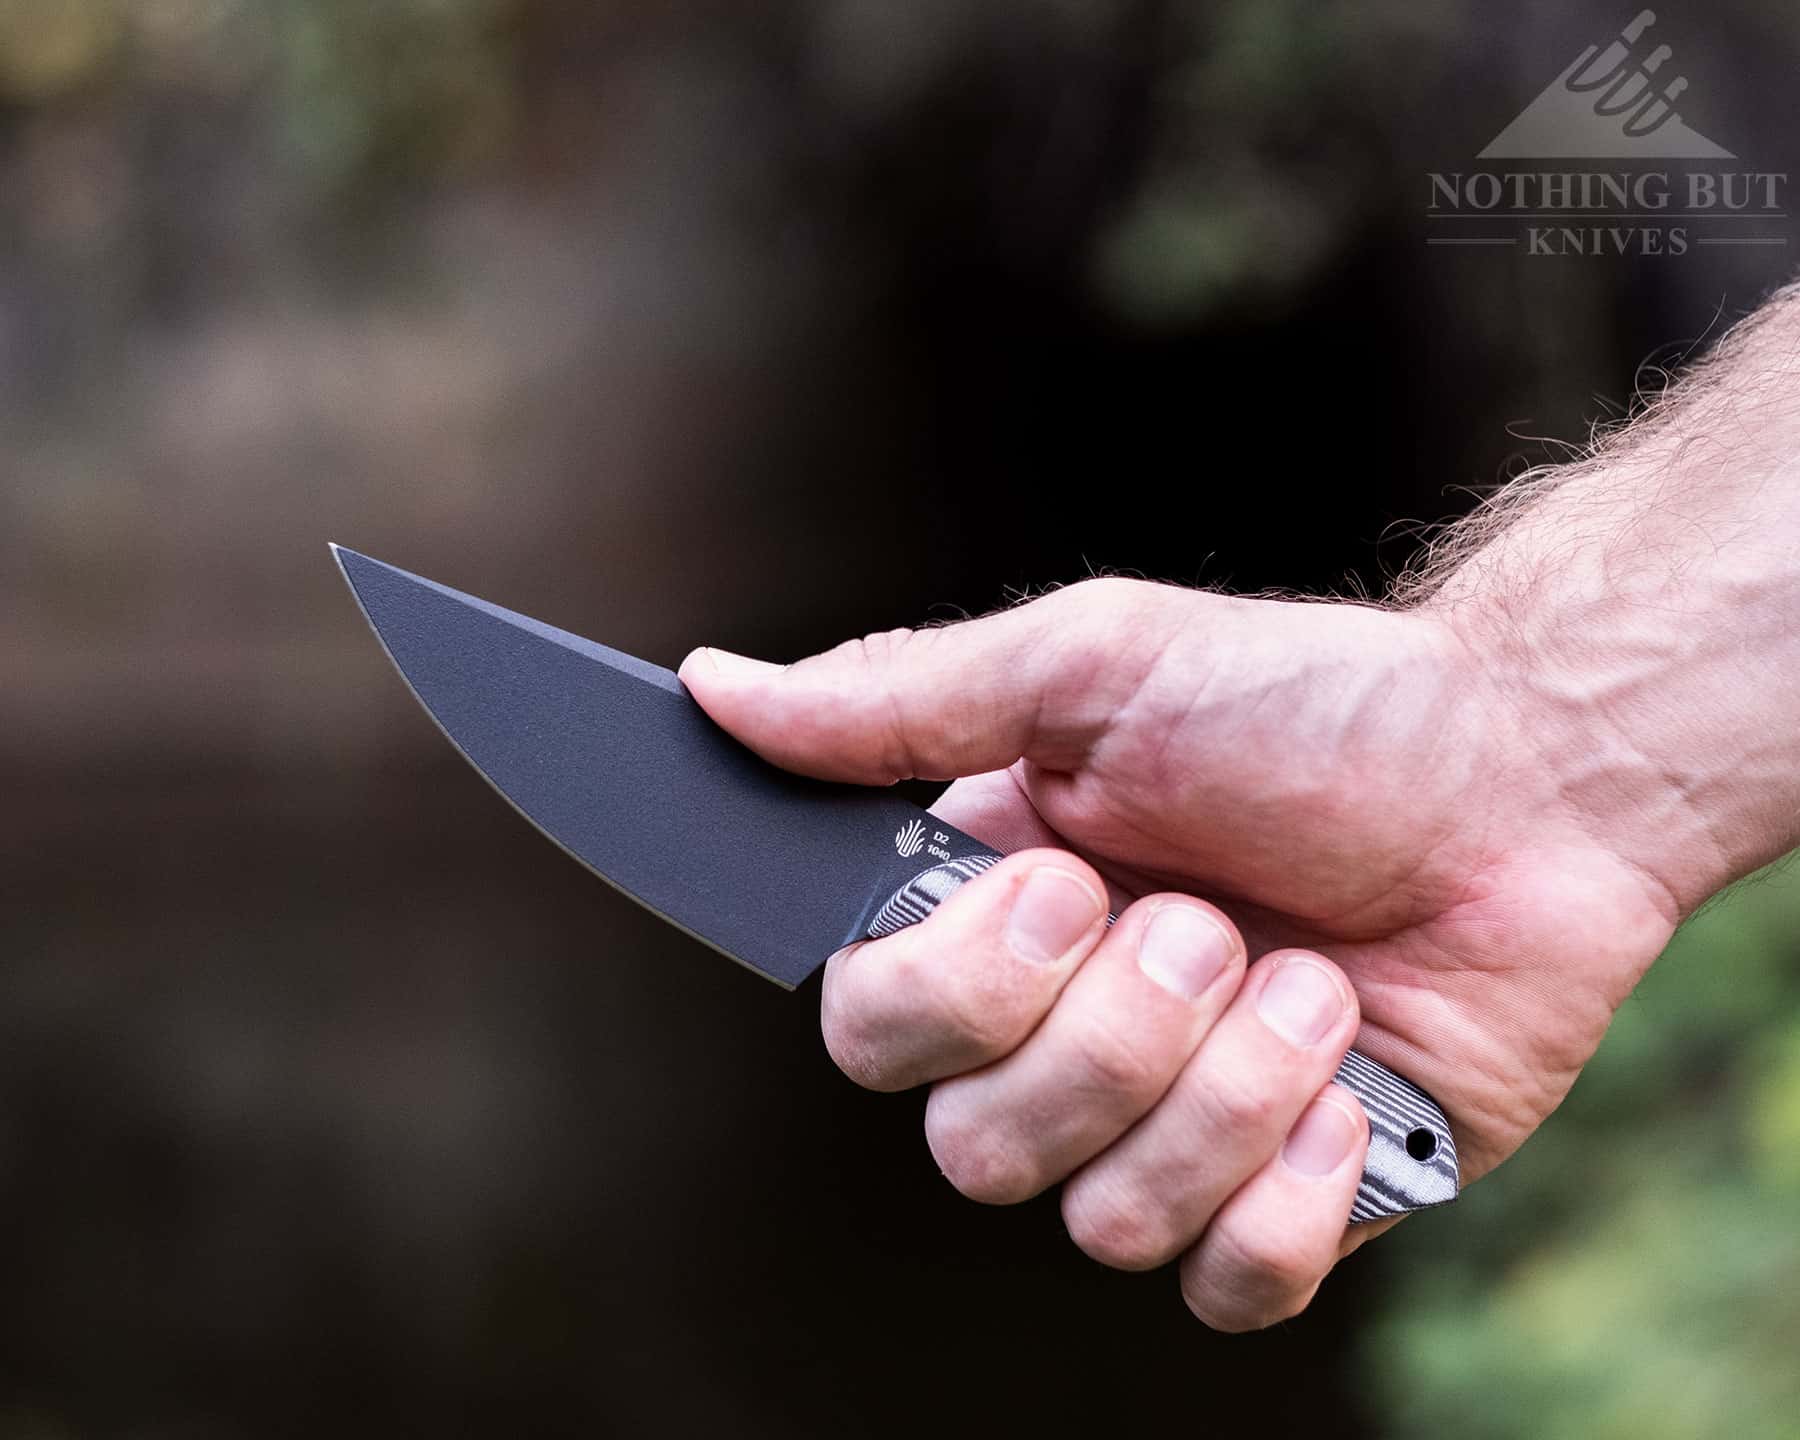 The Kizer Maverick Harpoon is lightweight and ergonomic making it a great choice for tactical situations.  